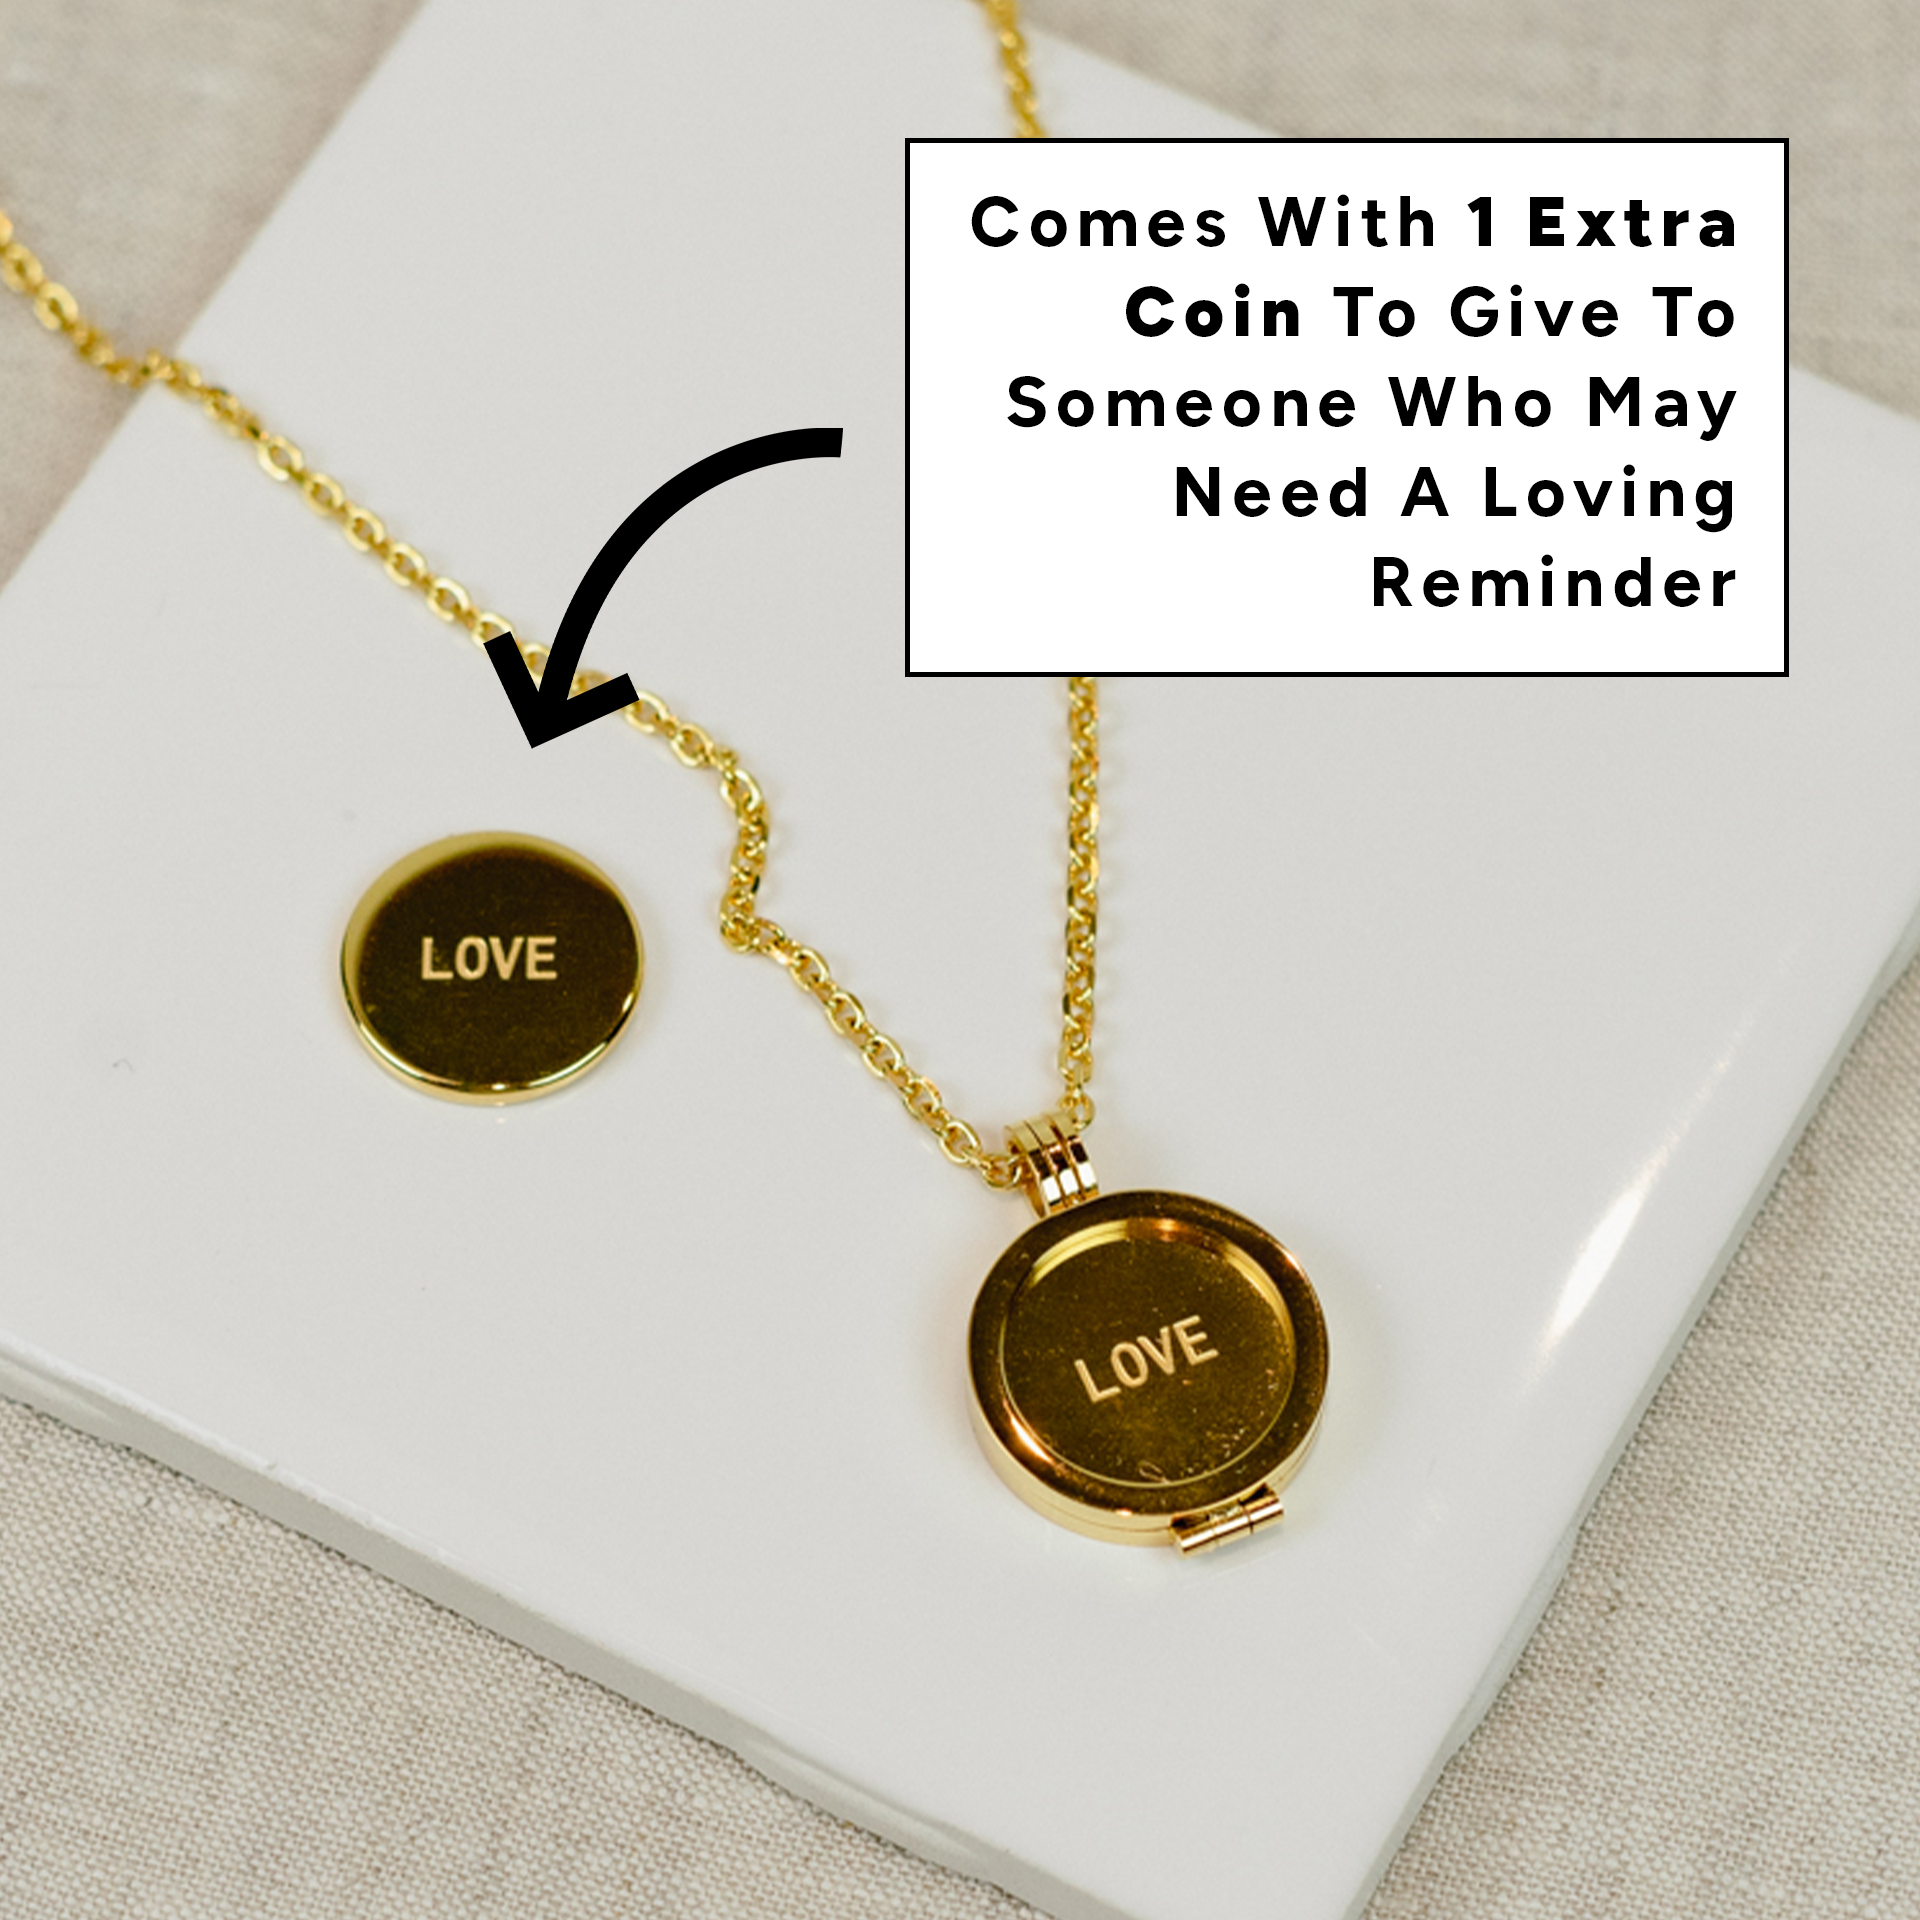 Coin Holder Bezel Penny USA 1 Cent Gold Tone for Charm, Necklace, Pendant  Pk/4 Pk/10 - Etsy